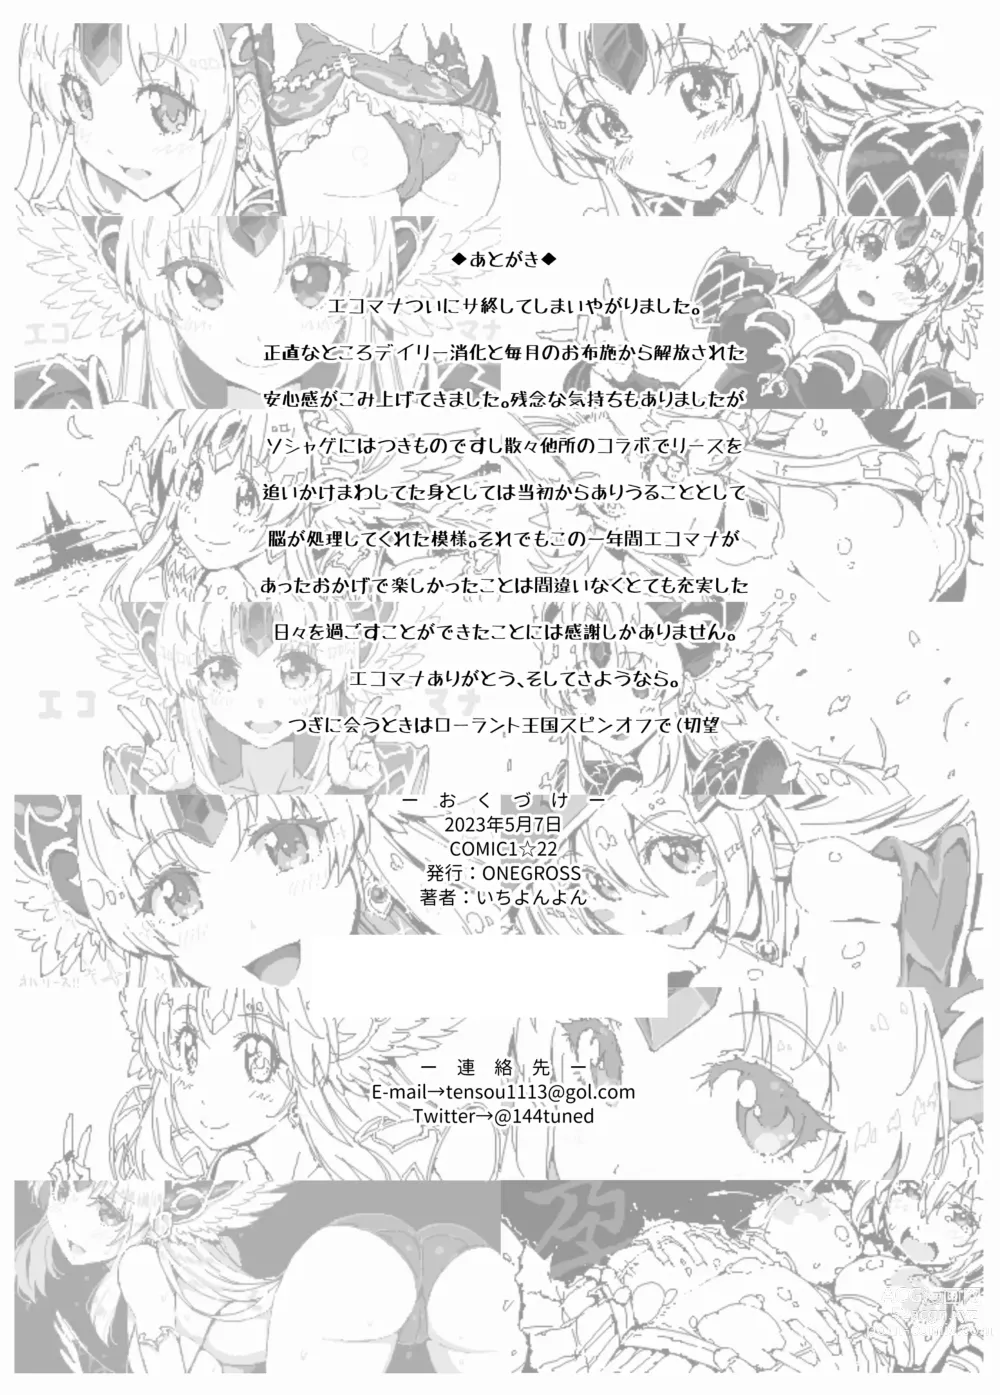 Page 13 of doujinshi Re Notice: End of App Service